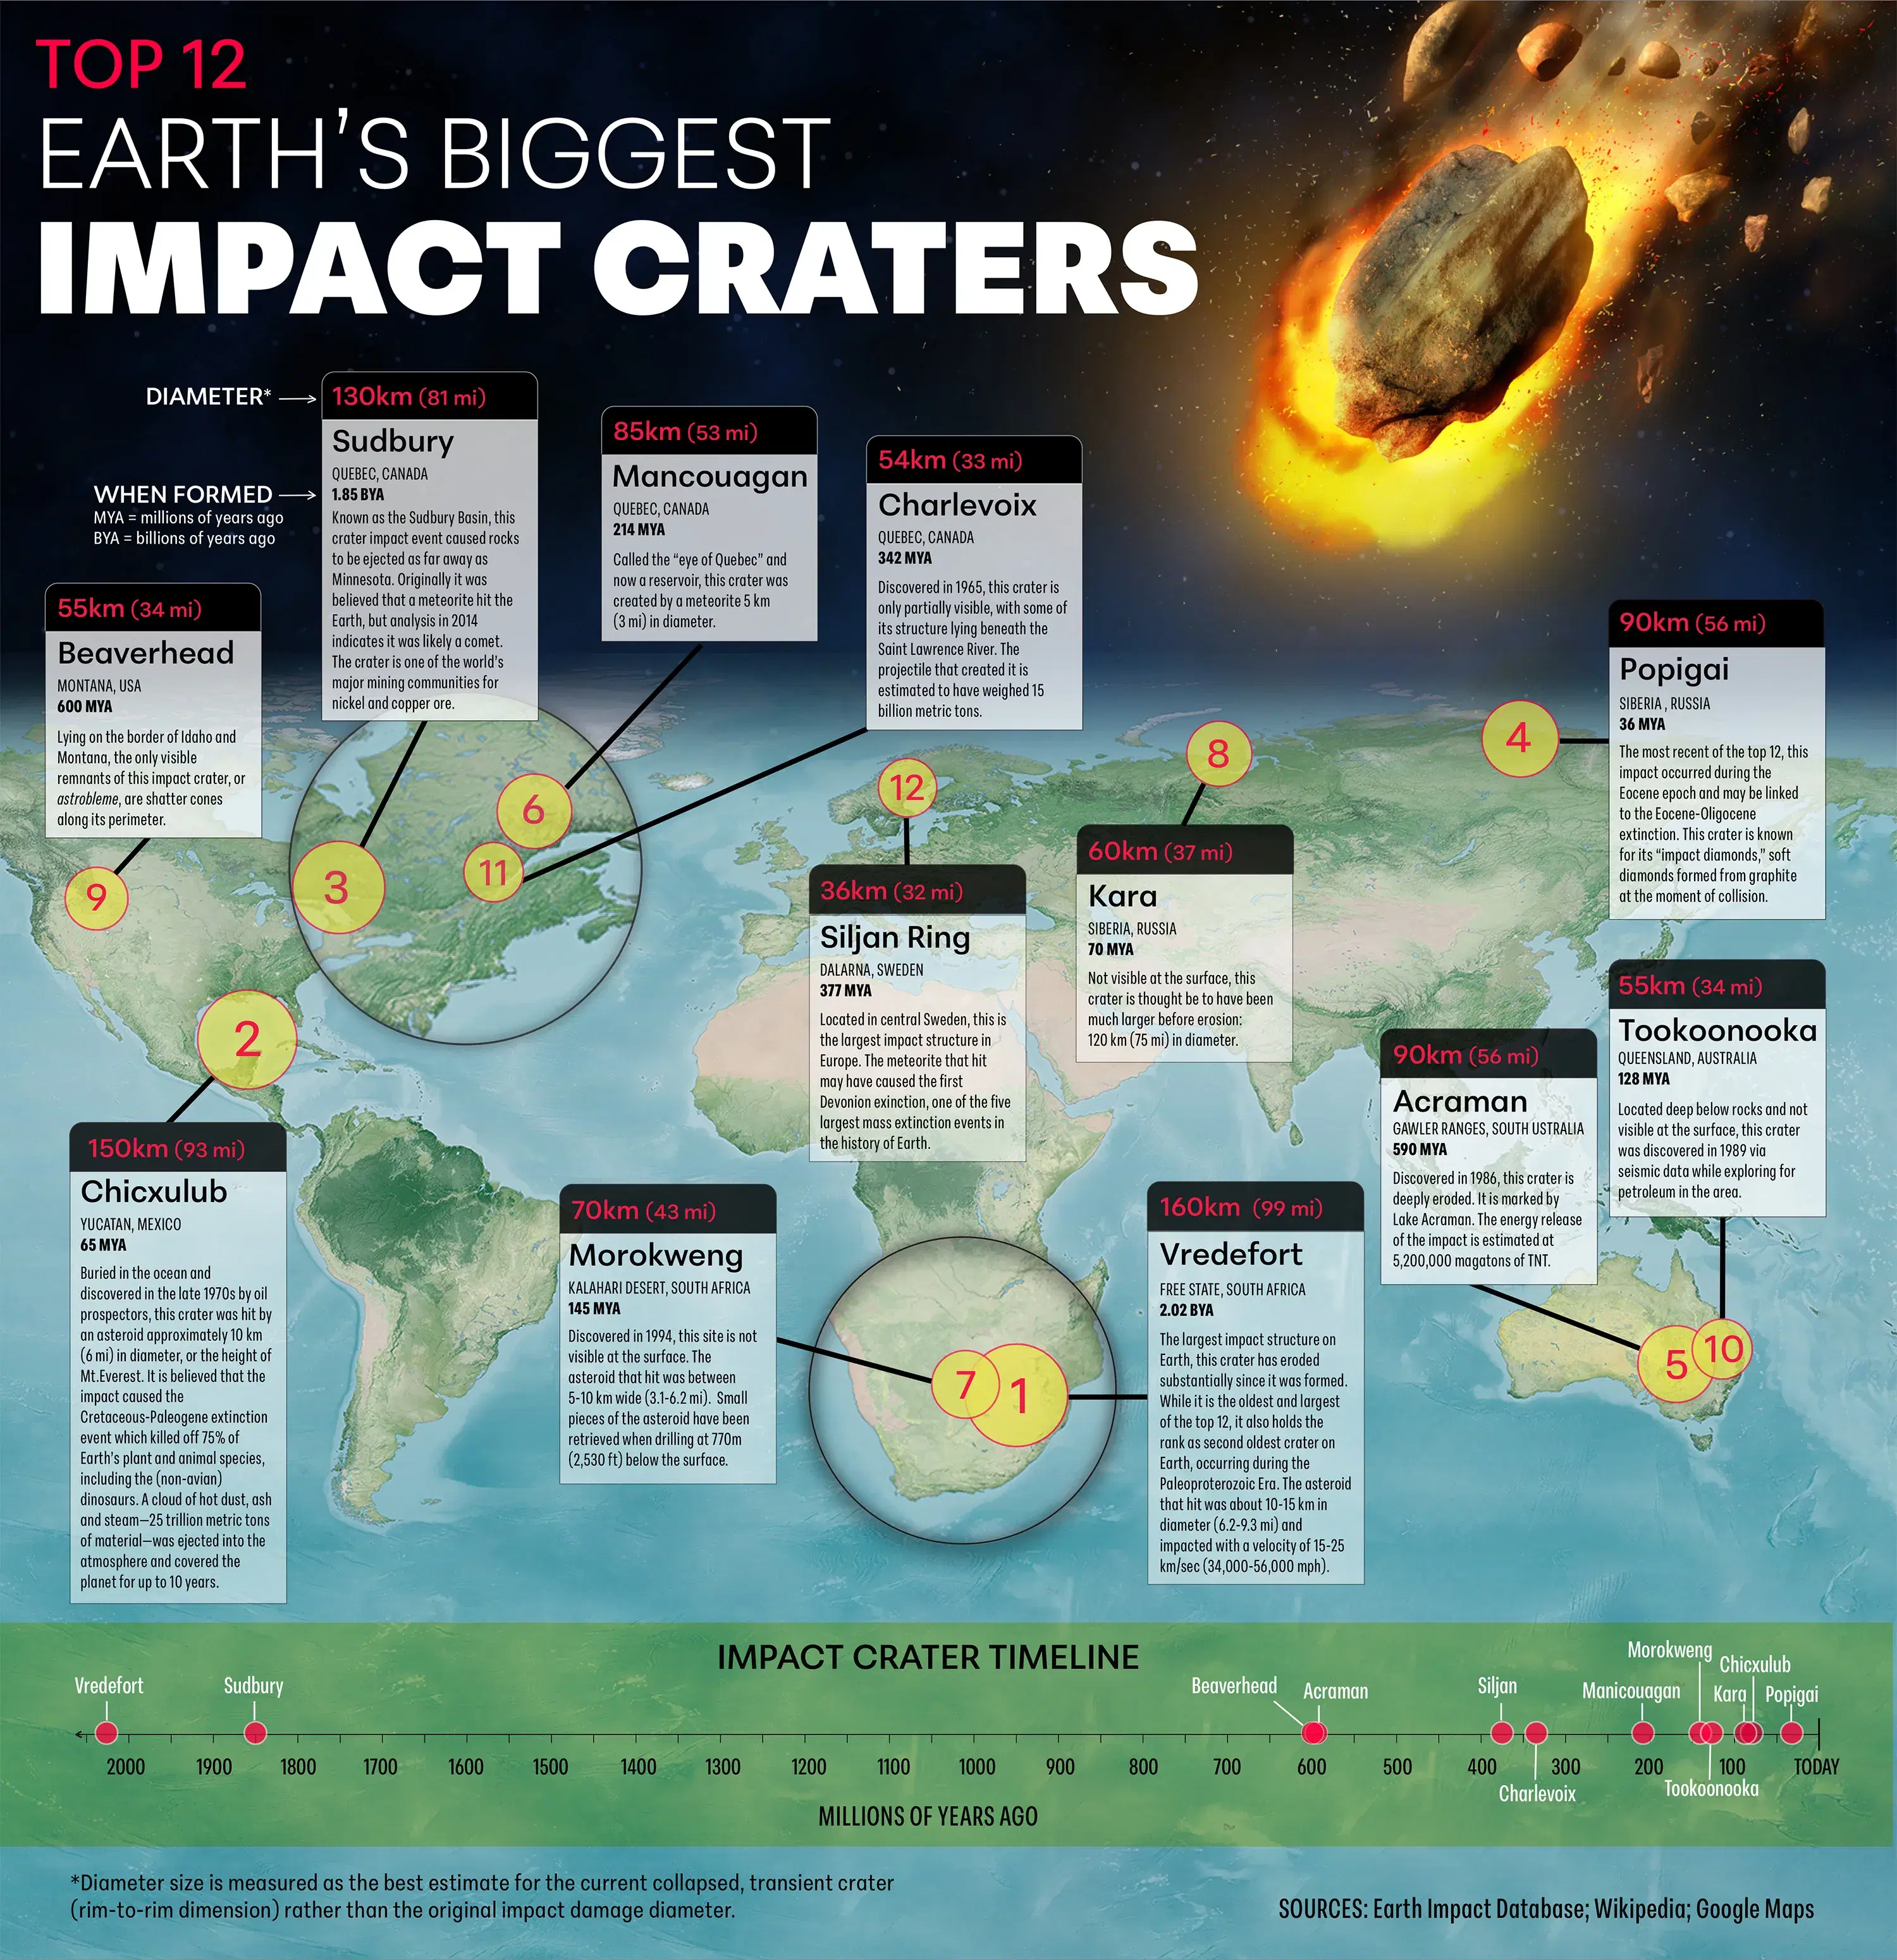 Top 12 Biggest Impact Craters on Earth